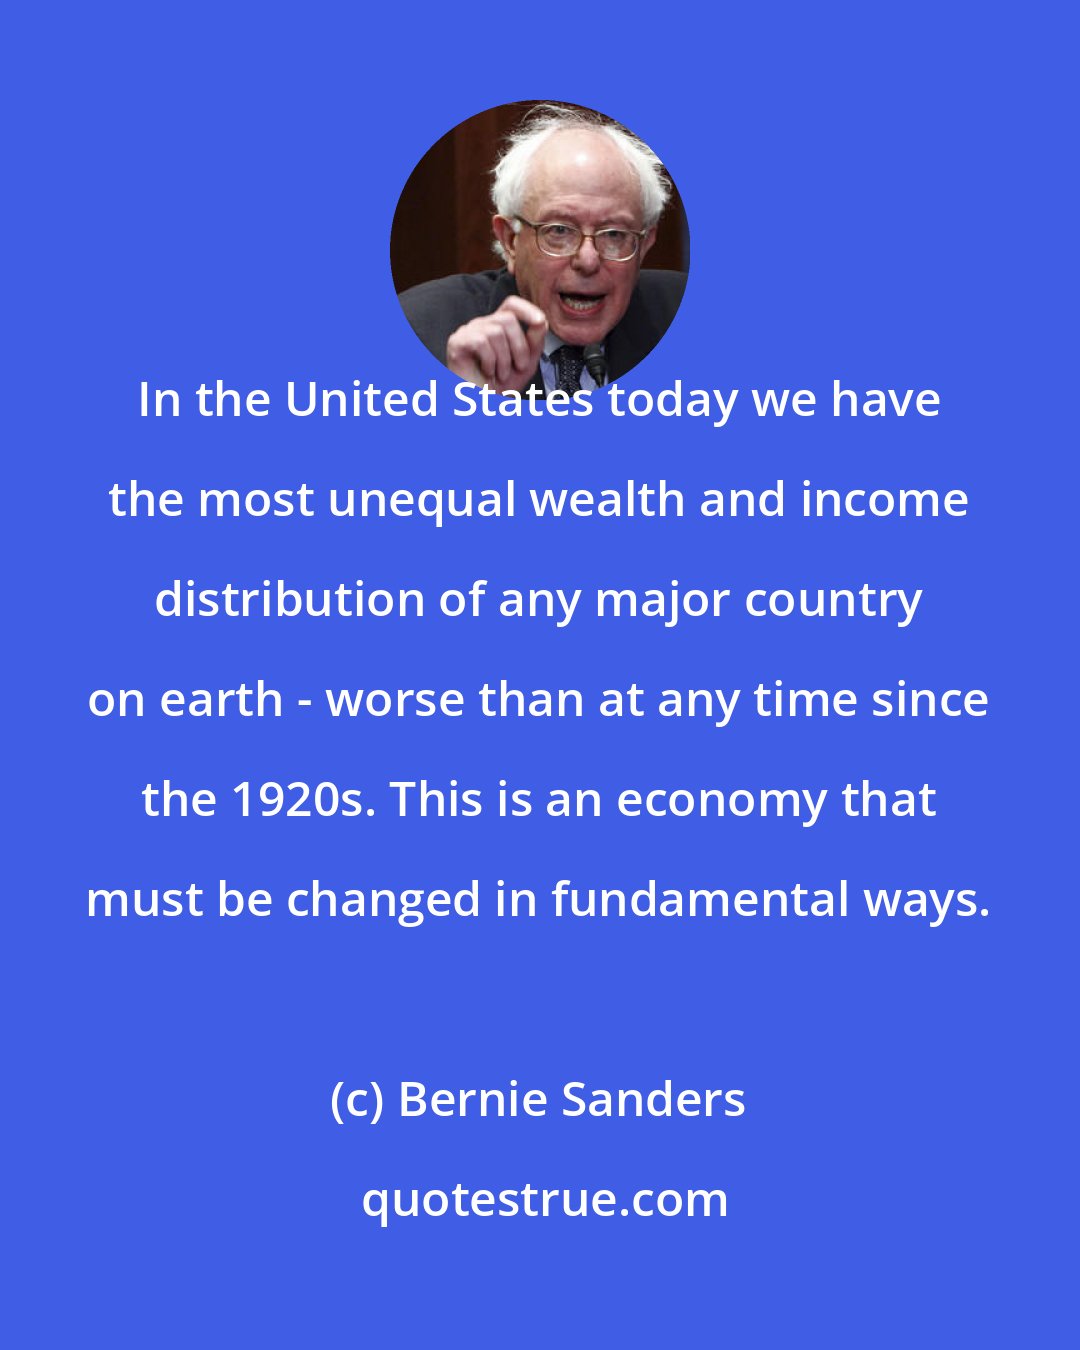 Bernie Sanders: In the United States today we have the most unequal wealth and income distribution of any major country on earth - worse than at any time since the 1920s. This is an economy that must be changed in fundamental ways.